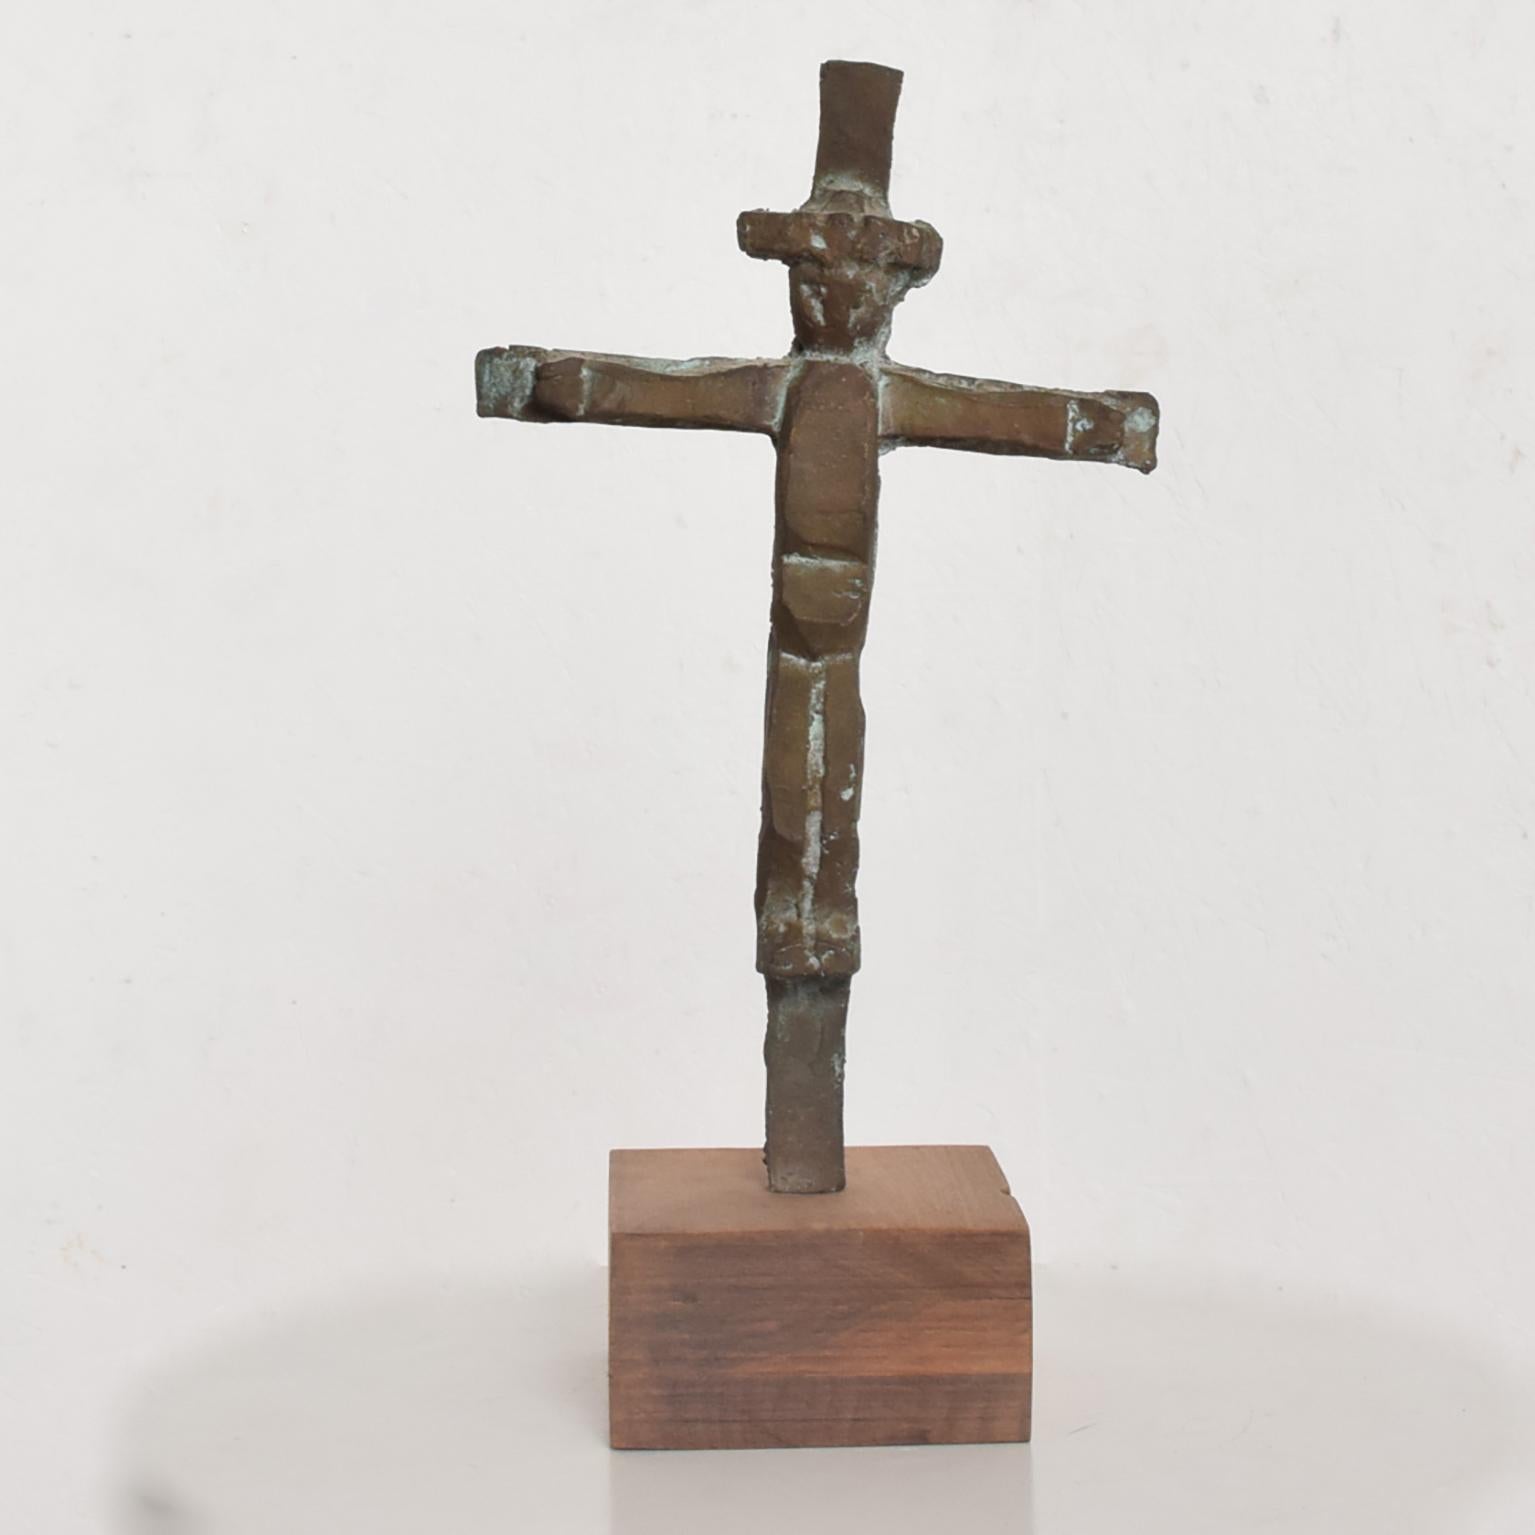 For your consideration a modern abstract cross by Myrna M Mobile. Bronze-mounted in walnut wood. 

Dimensions: 17 3/4